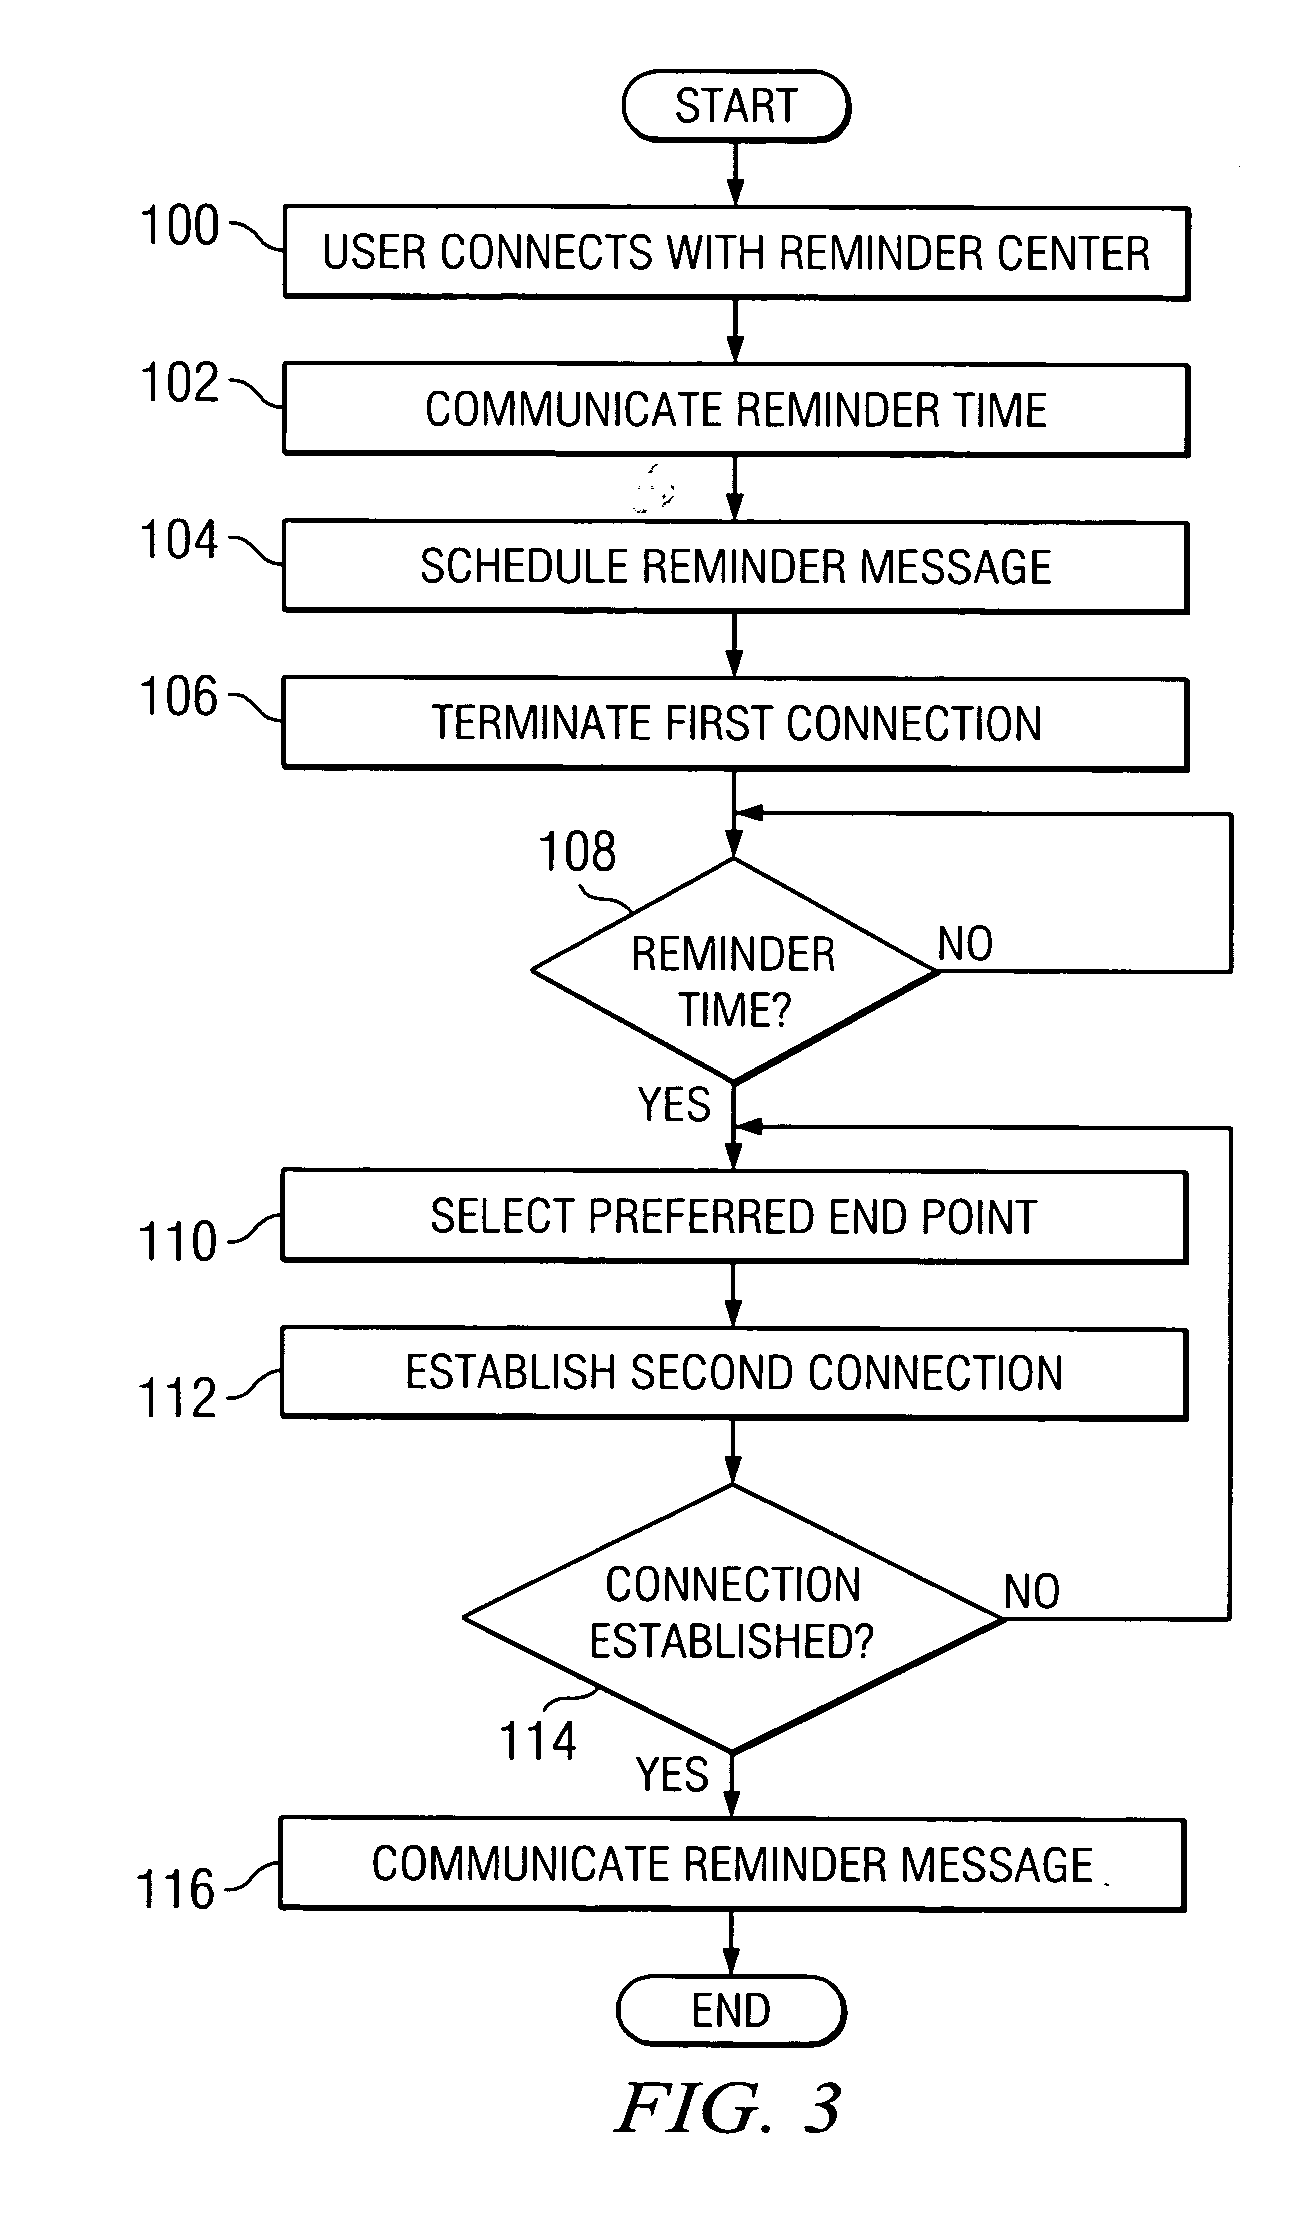 System and method for voice scheduling and multimedia alerting